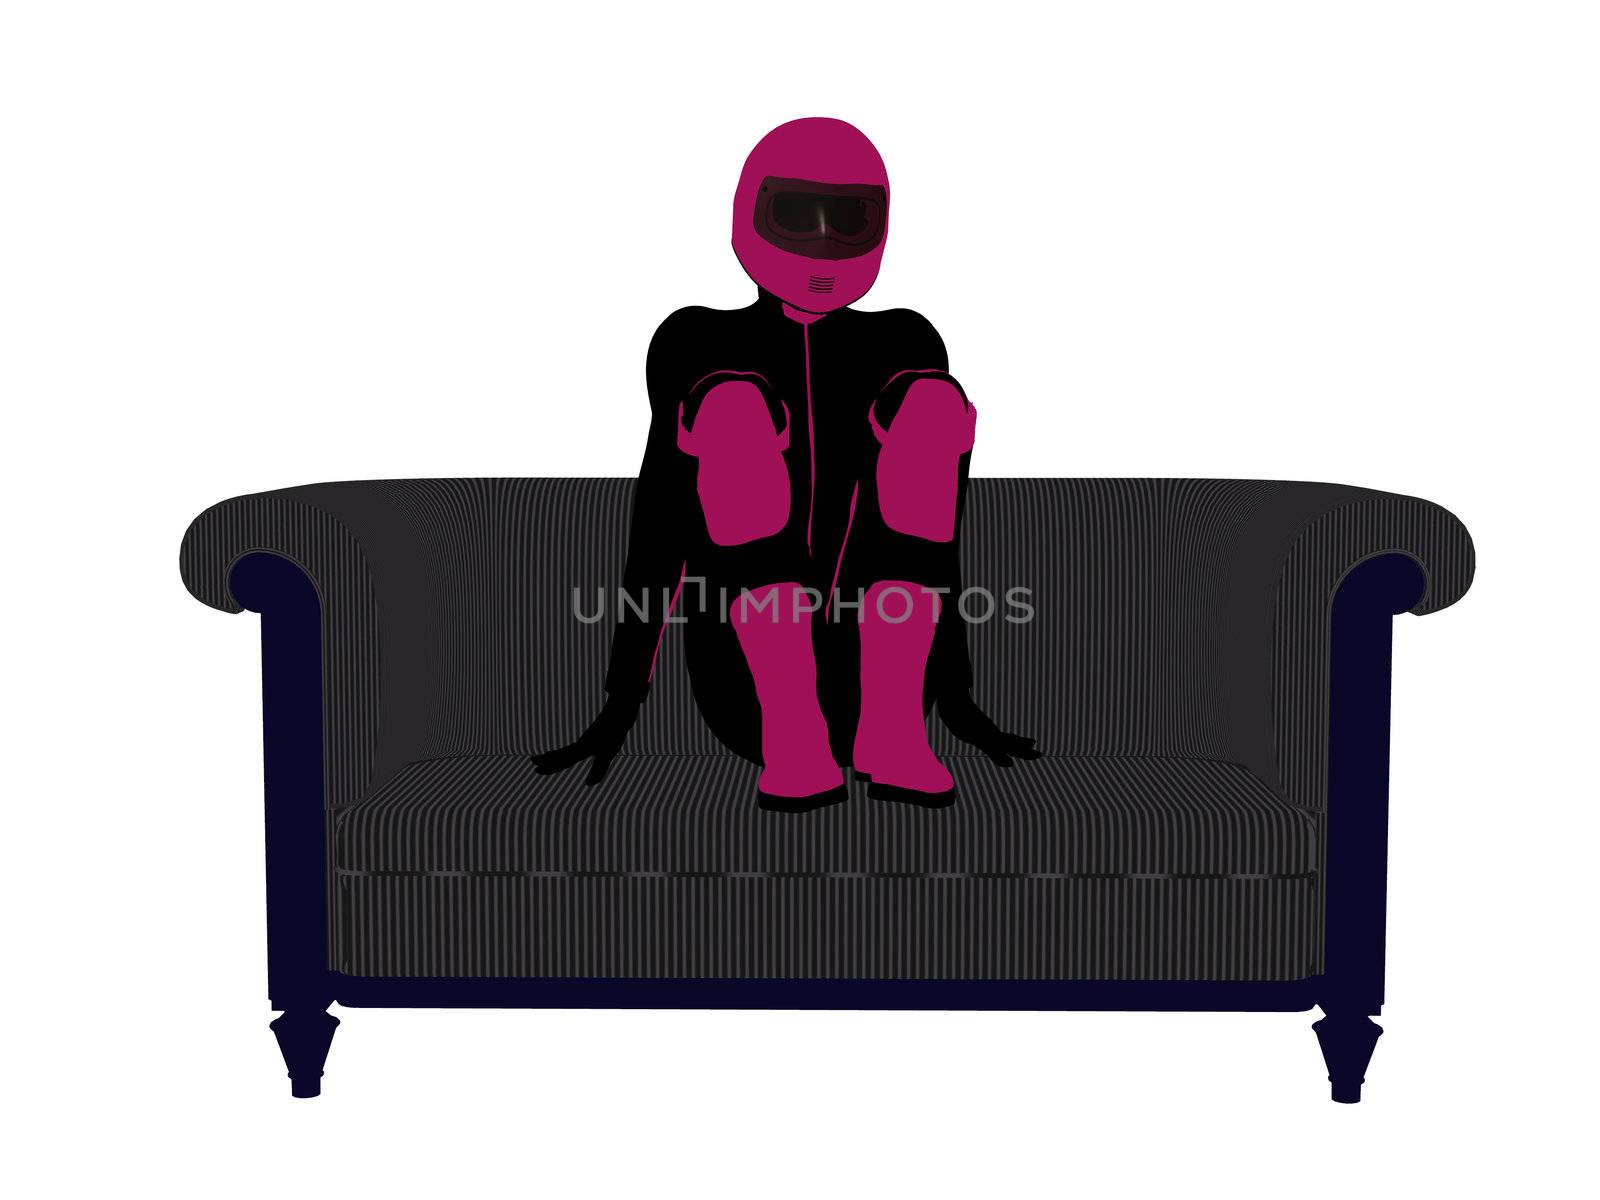 Female Motorcycle Rider Sitting On a Sofa Silhouette by kathygold